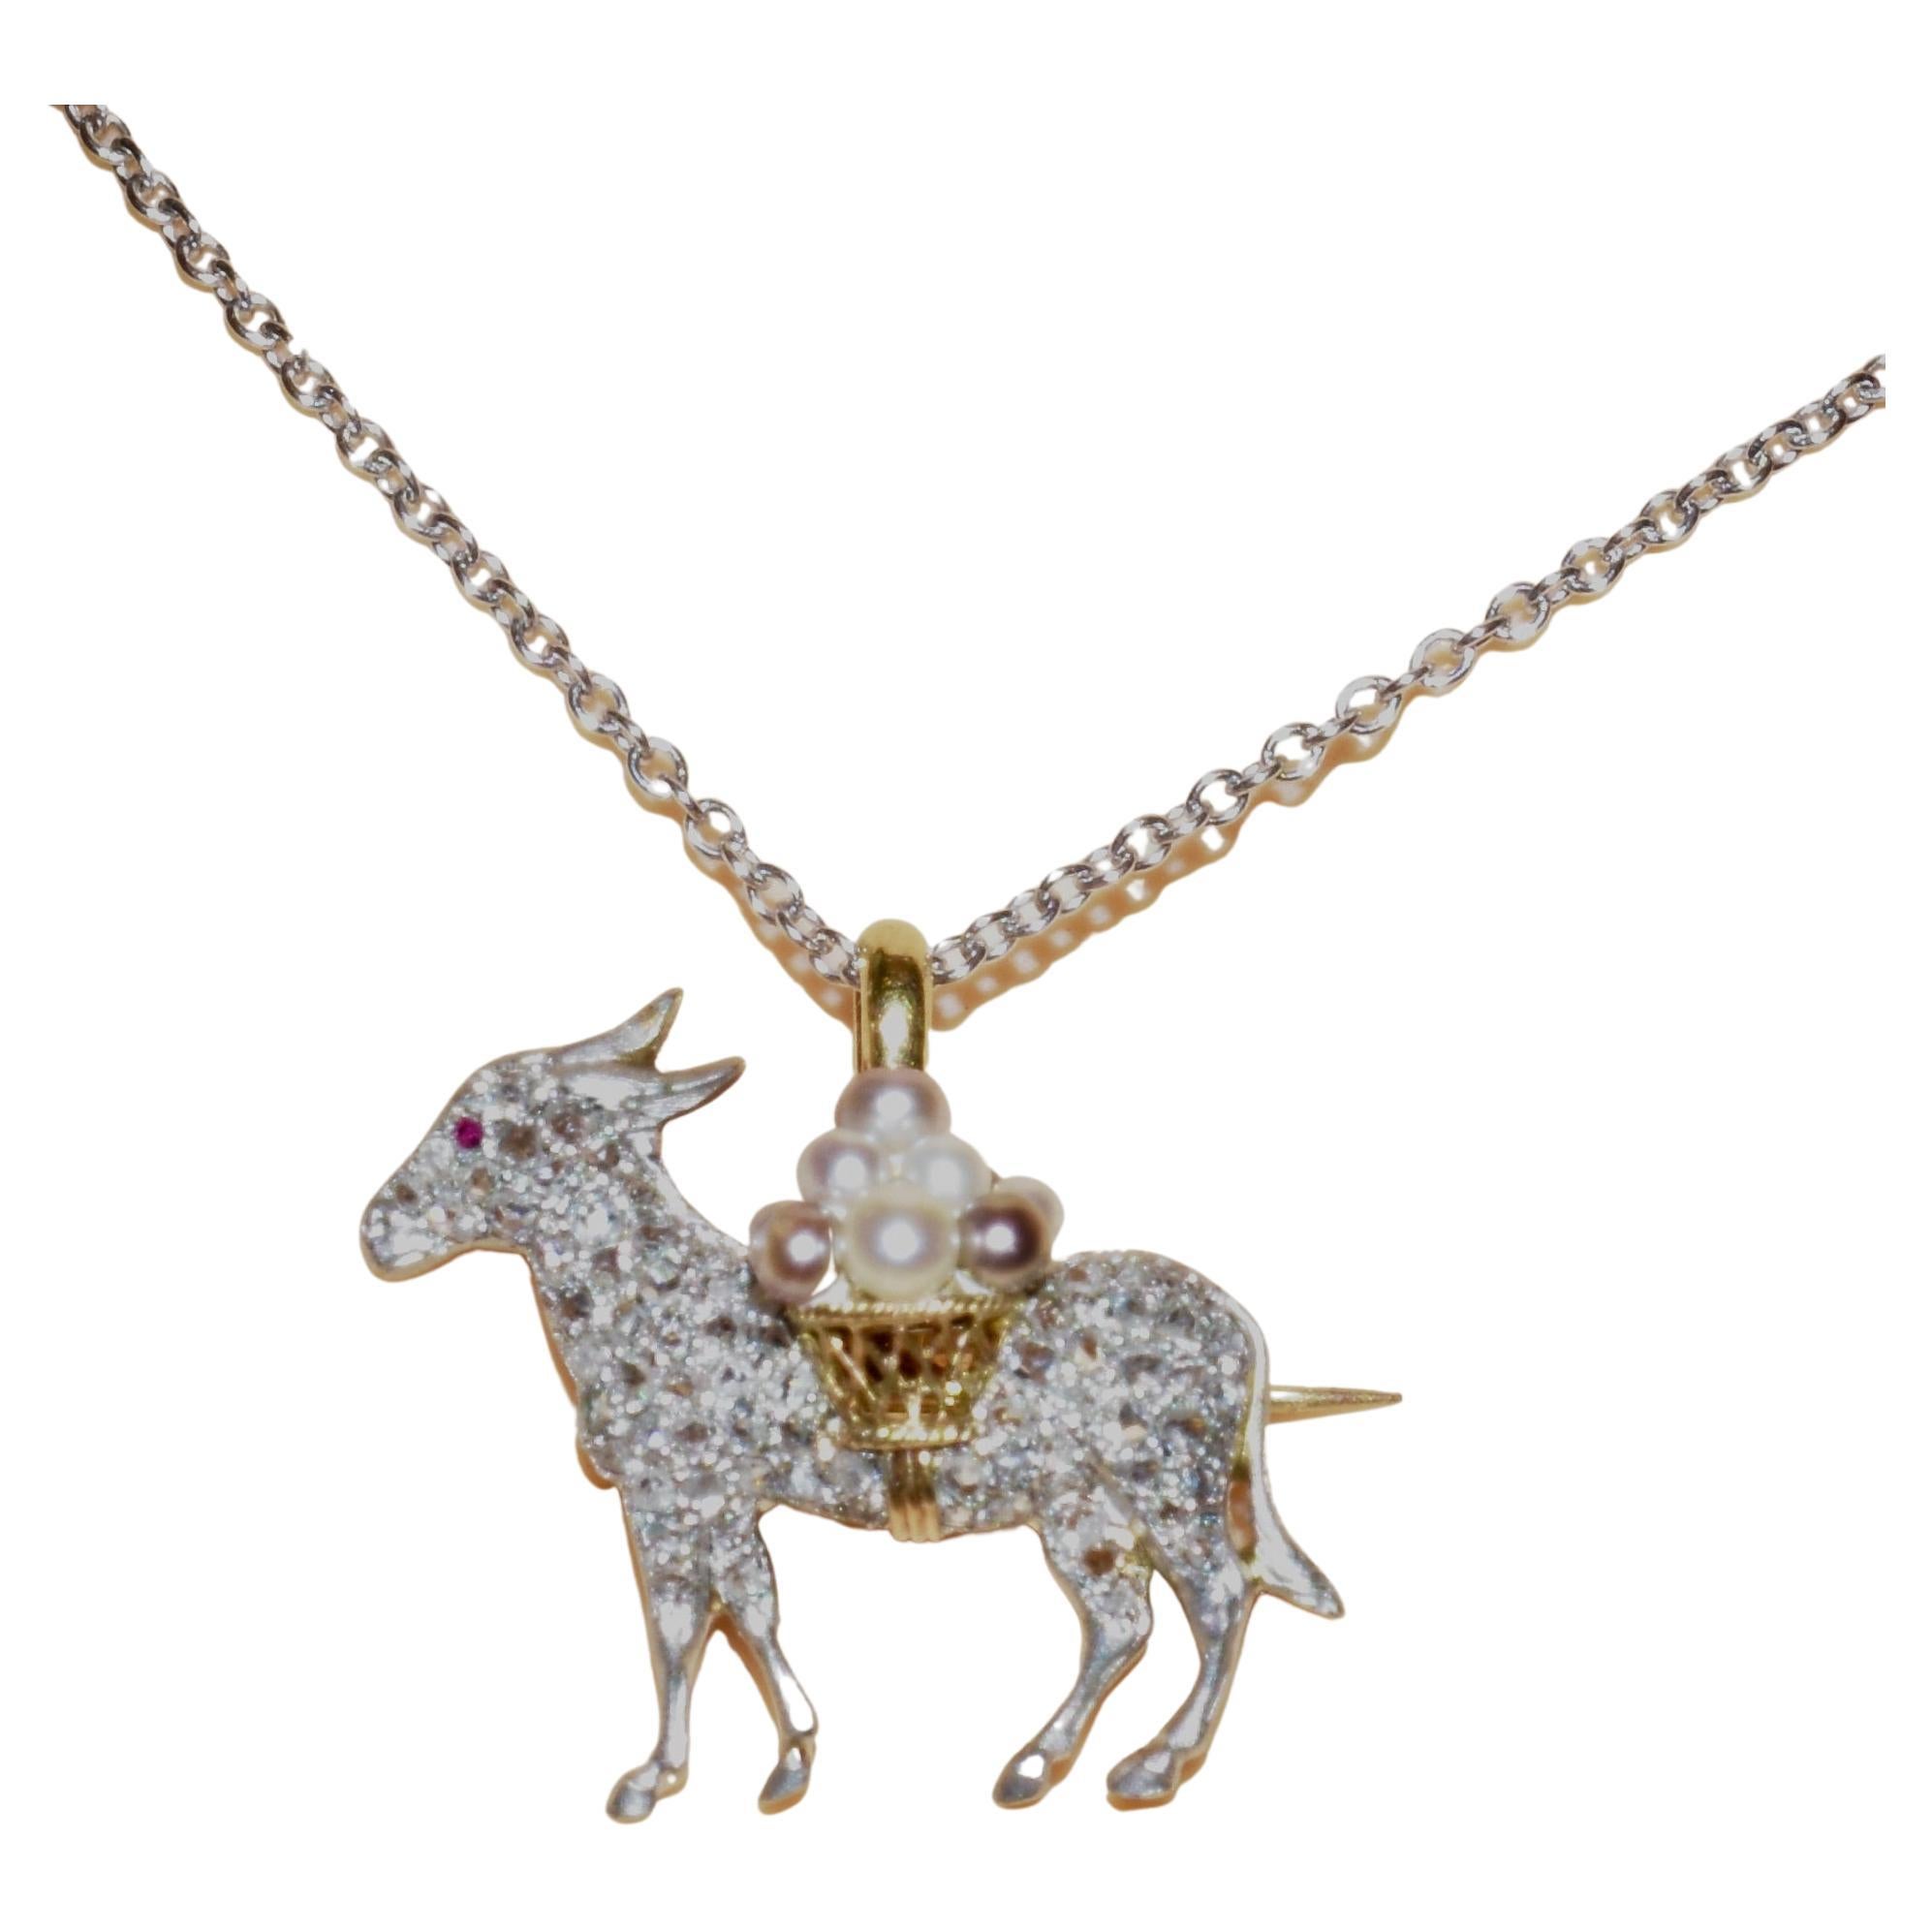 Antique brooch or pendant .  Mr. cute little burro is vertically .89 inches (to the top of his bale), or 22.61 mm., and horizontally .994 inches or 25.25 mm. Pave with rose cut diamonds.  Mr. burro has a natural Burma  ruby eye.  His handsome figure